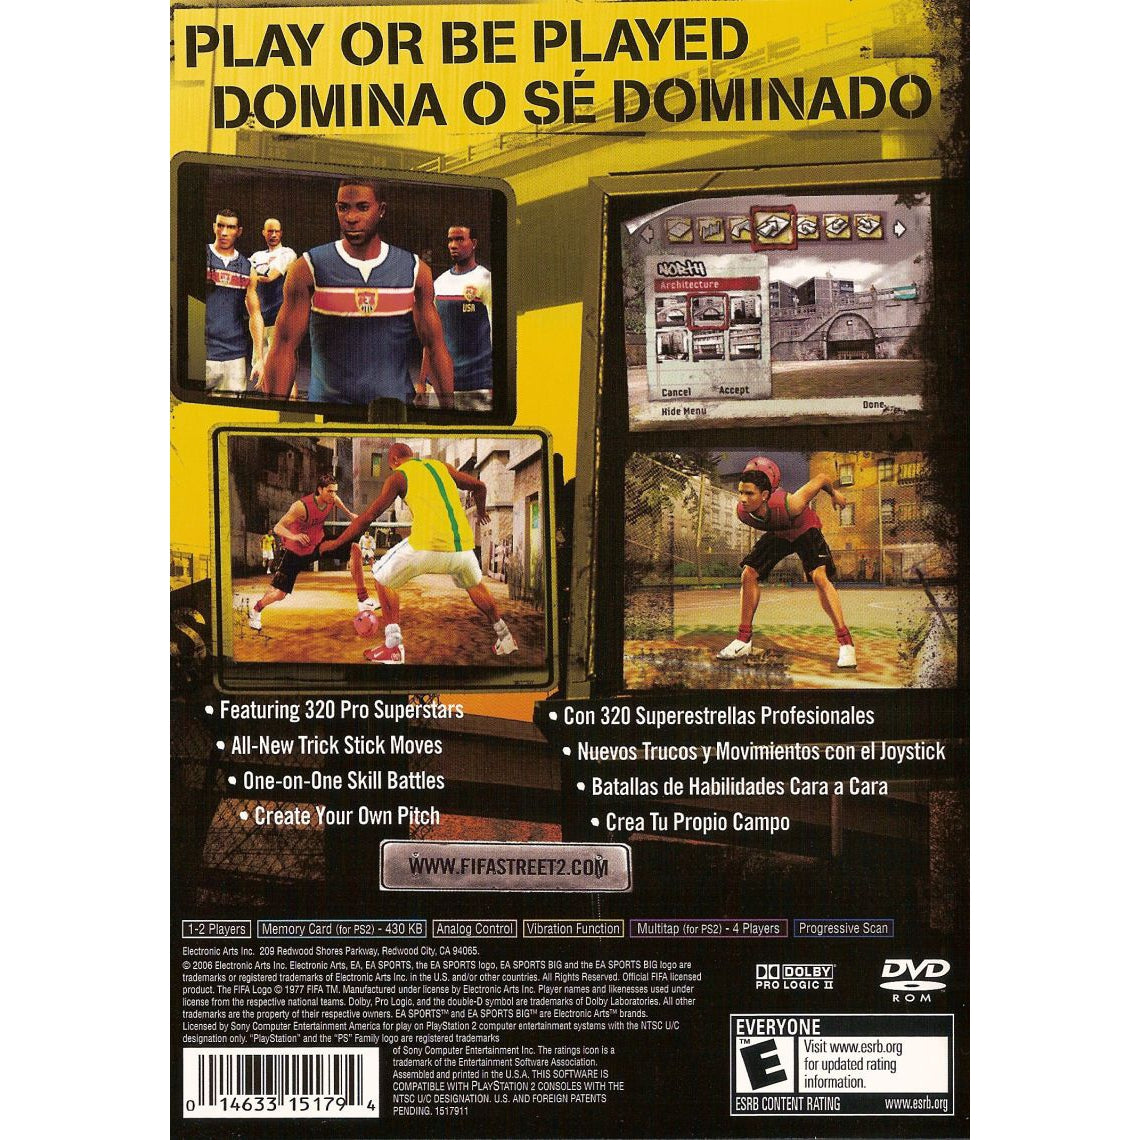 FIFA Street 2 - PlayStation 2 (PS2) Game Complete - YourGamingShop.com - Buy, Sell, Trade Video Games Online. 120 Day Warranty. Satisfaction Guaranteed.